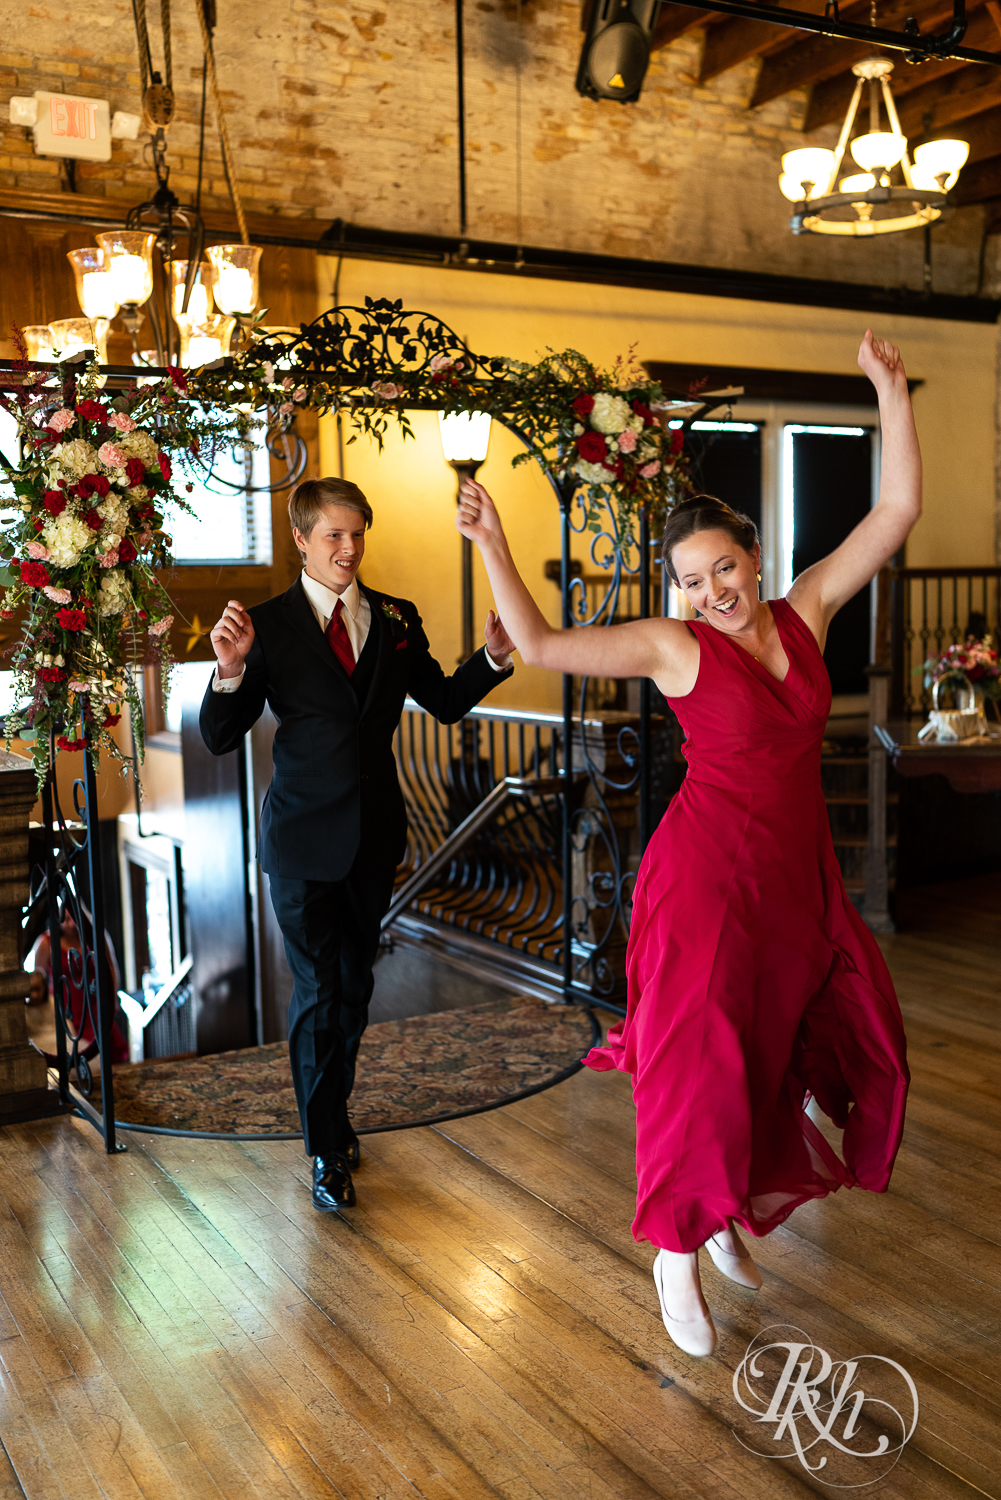 Wedding party performs grand entrance at Kellerman's Event Center in White Bear Lake, Minnesota.